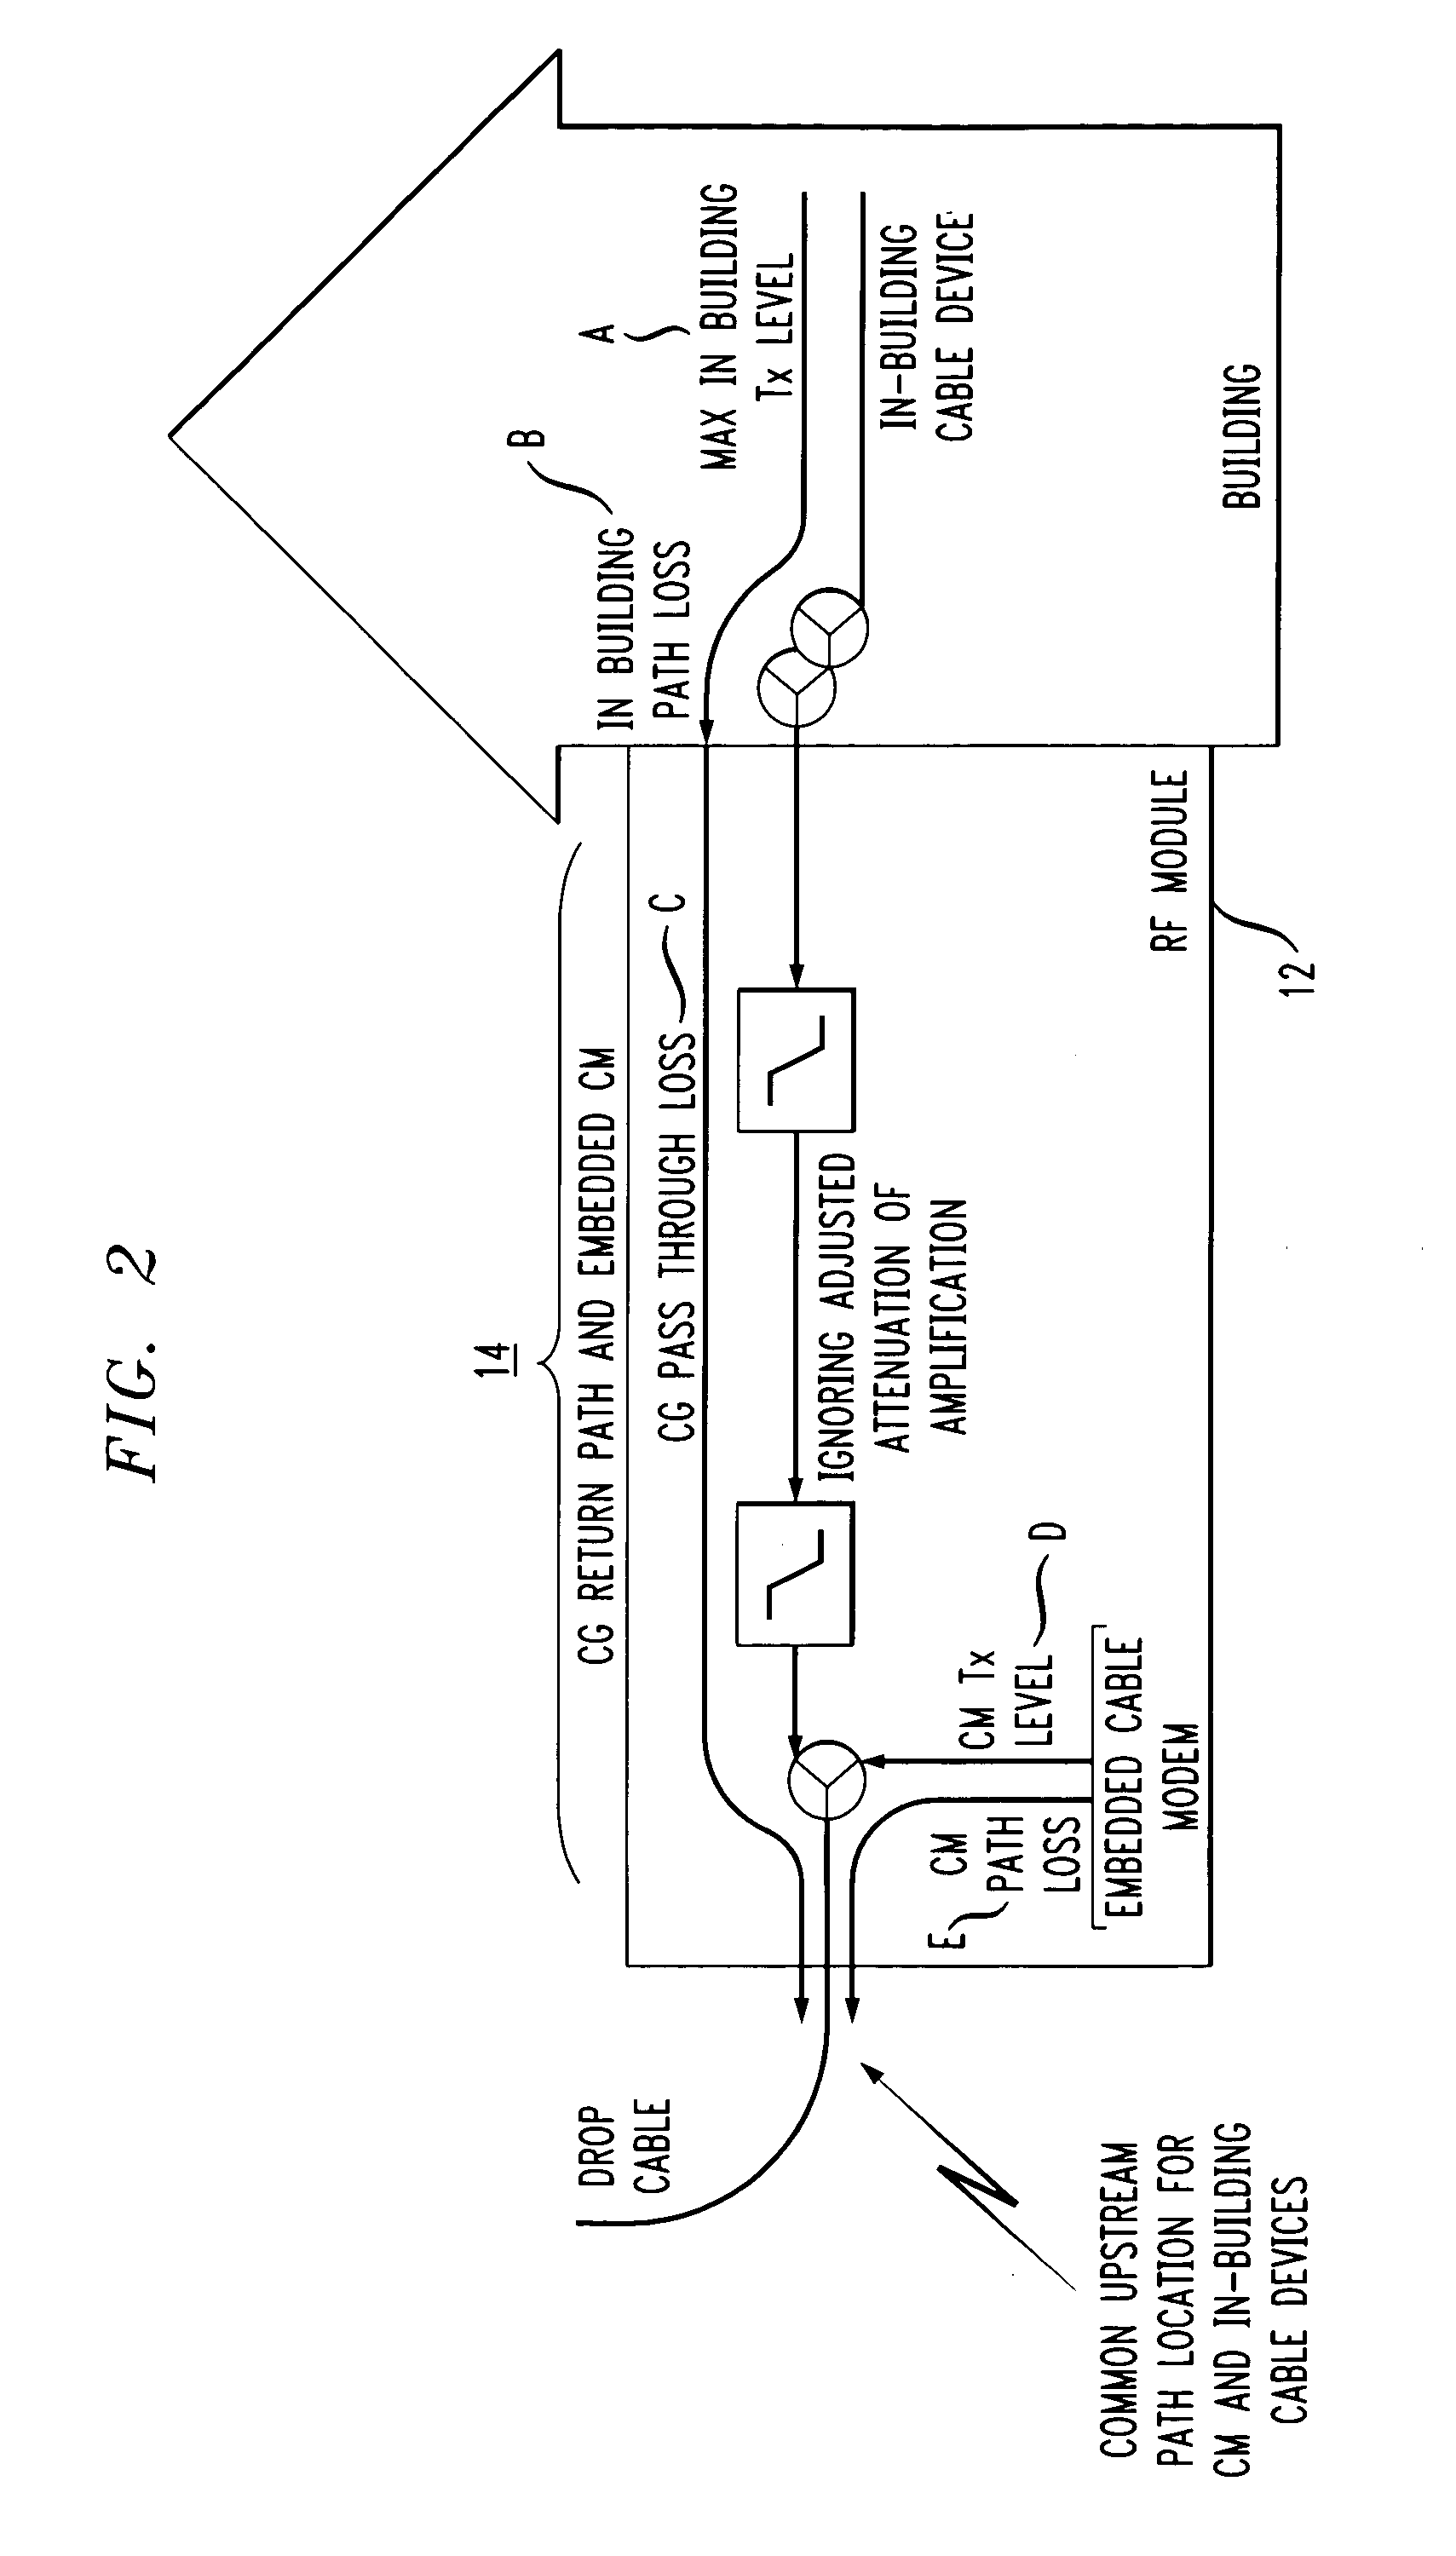 Dynamic upstream attenuation for ingress noise reduction